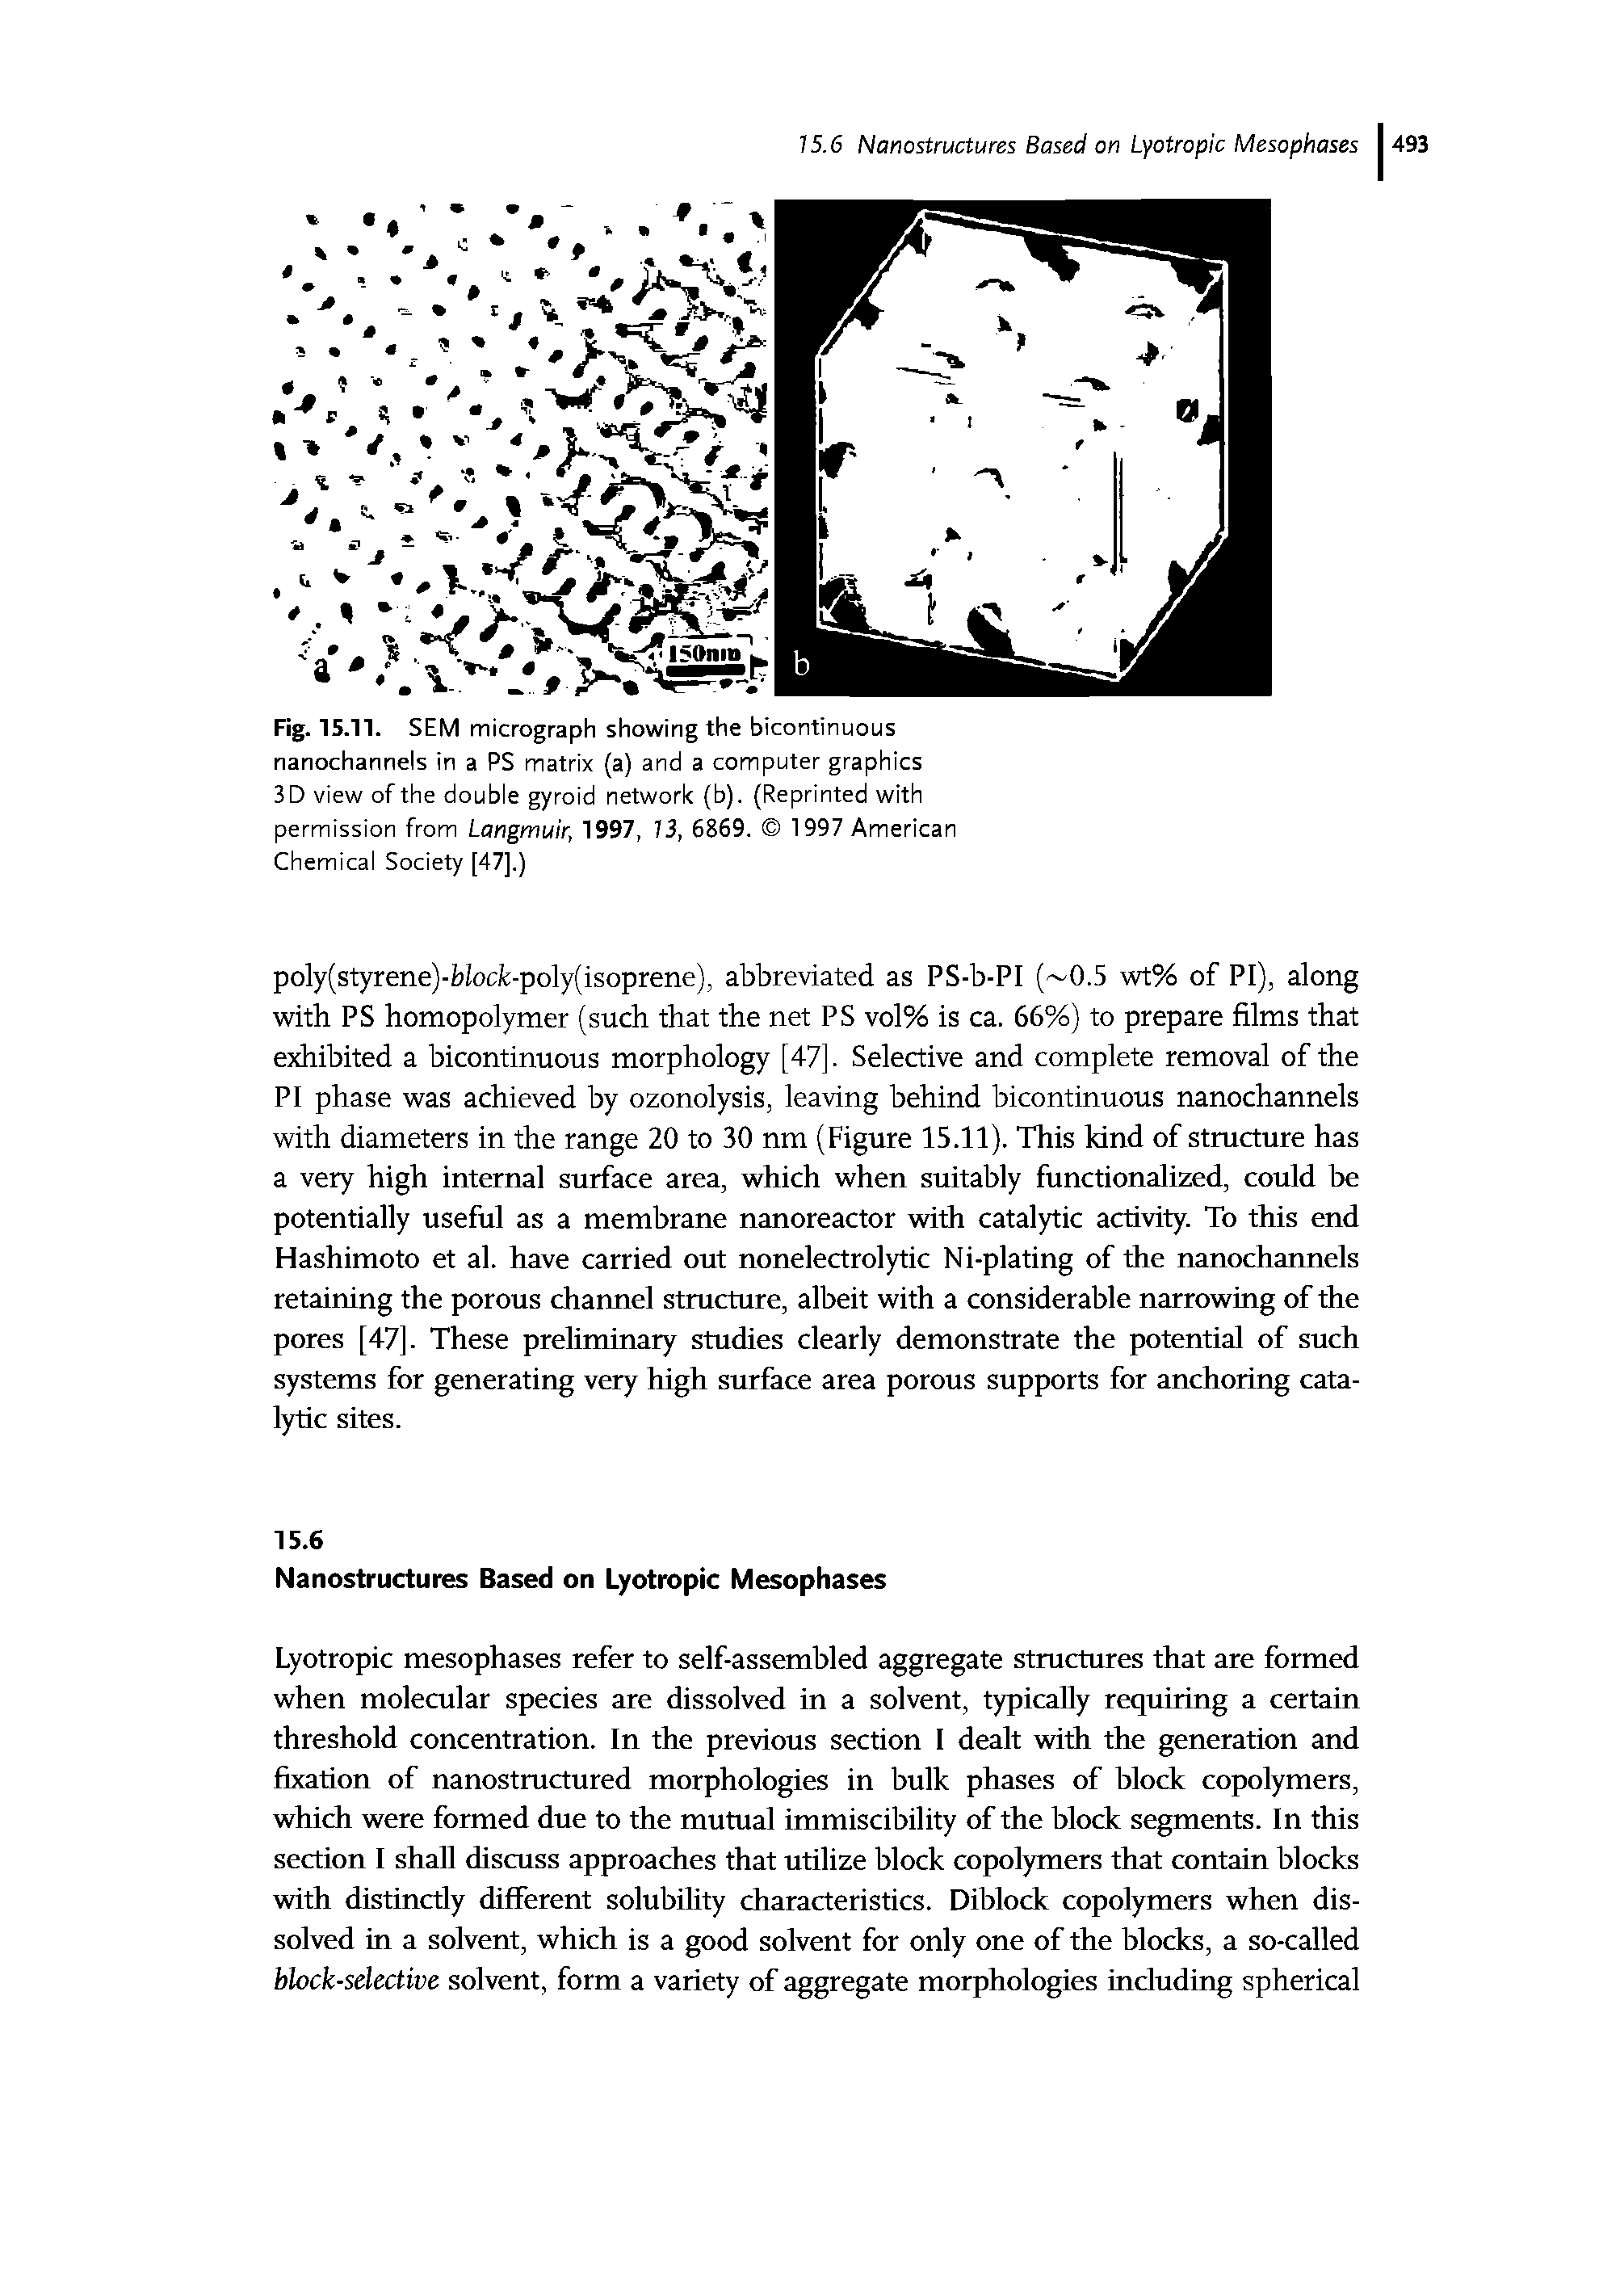 Fig. 15.11. SEM micrograph showing the bicontinuous nanochannels in a PS matrix (a) and a computer graphics 3D view of the double gyroid network (b). (Reprinted with permission from Langmuir, 1997, 73, 6869. 1997 American Chemical Society [47].)...